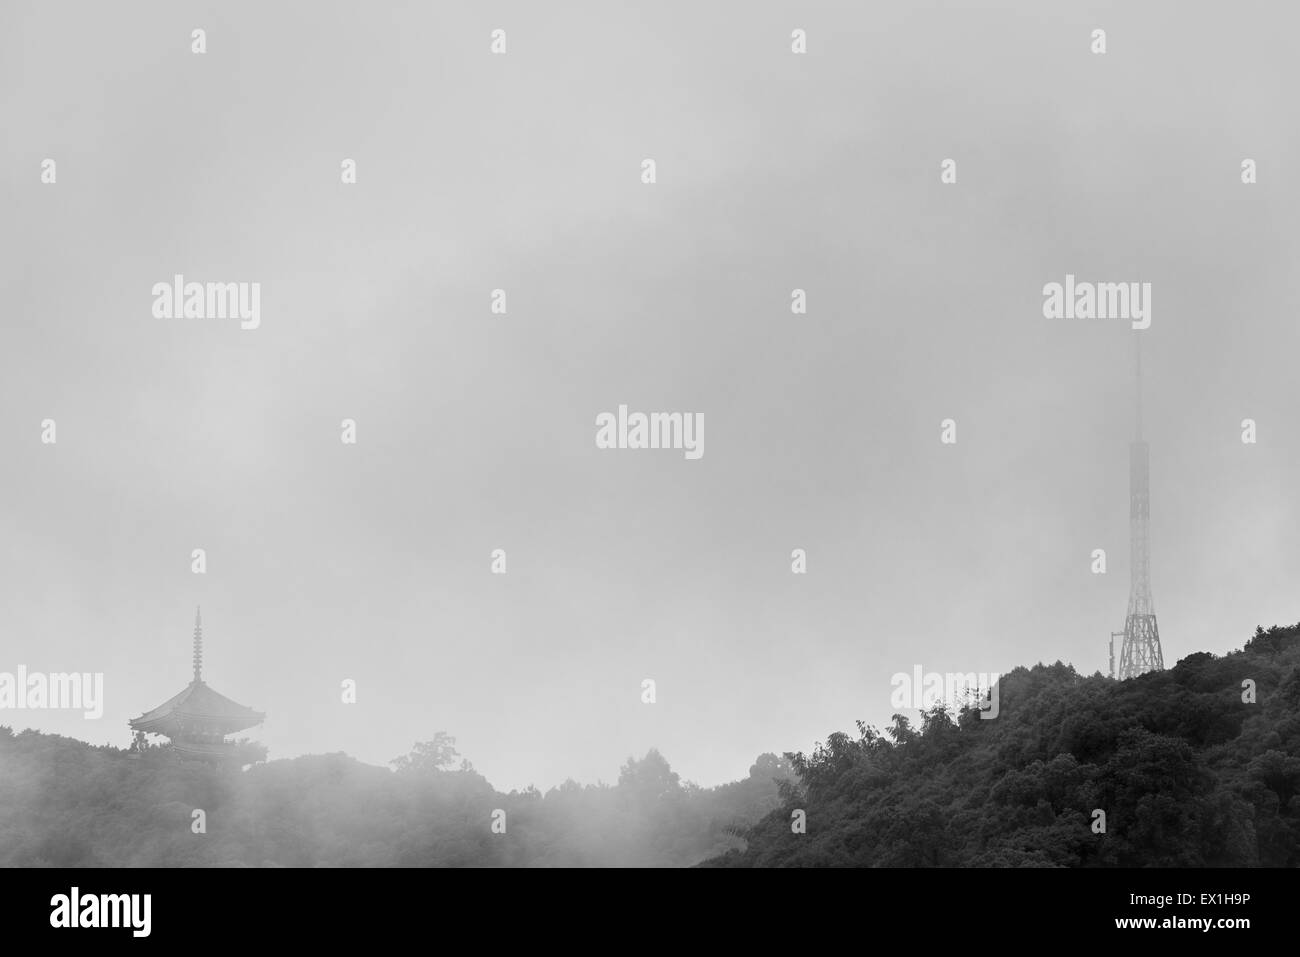 A black and white photo of an old Japanese Pagoda next to a modern radio tower on top of a mountain on a rainy, foggy day. Stock Photo